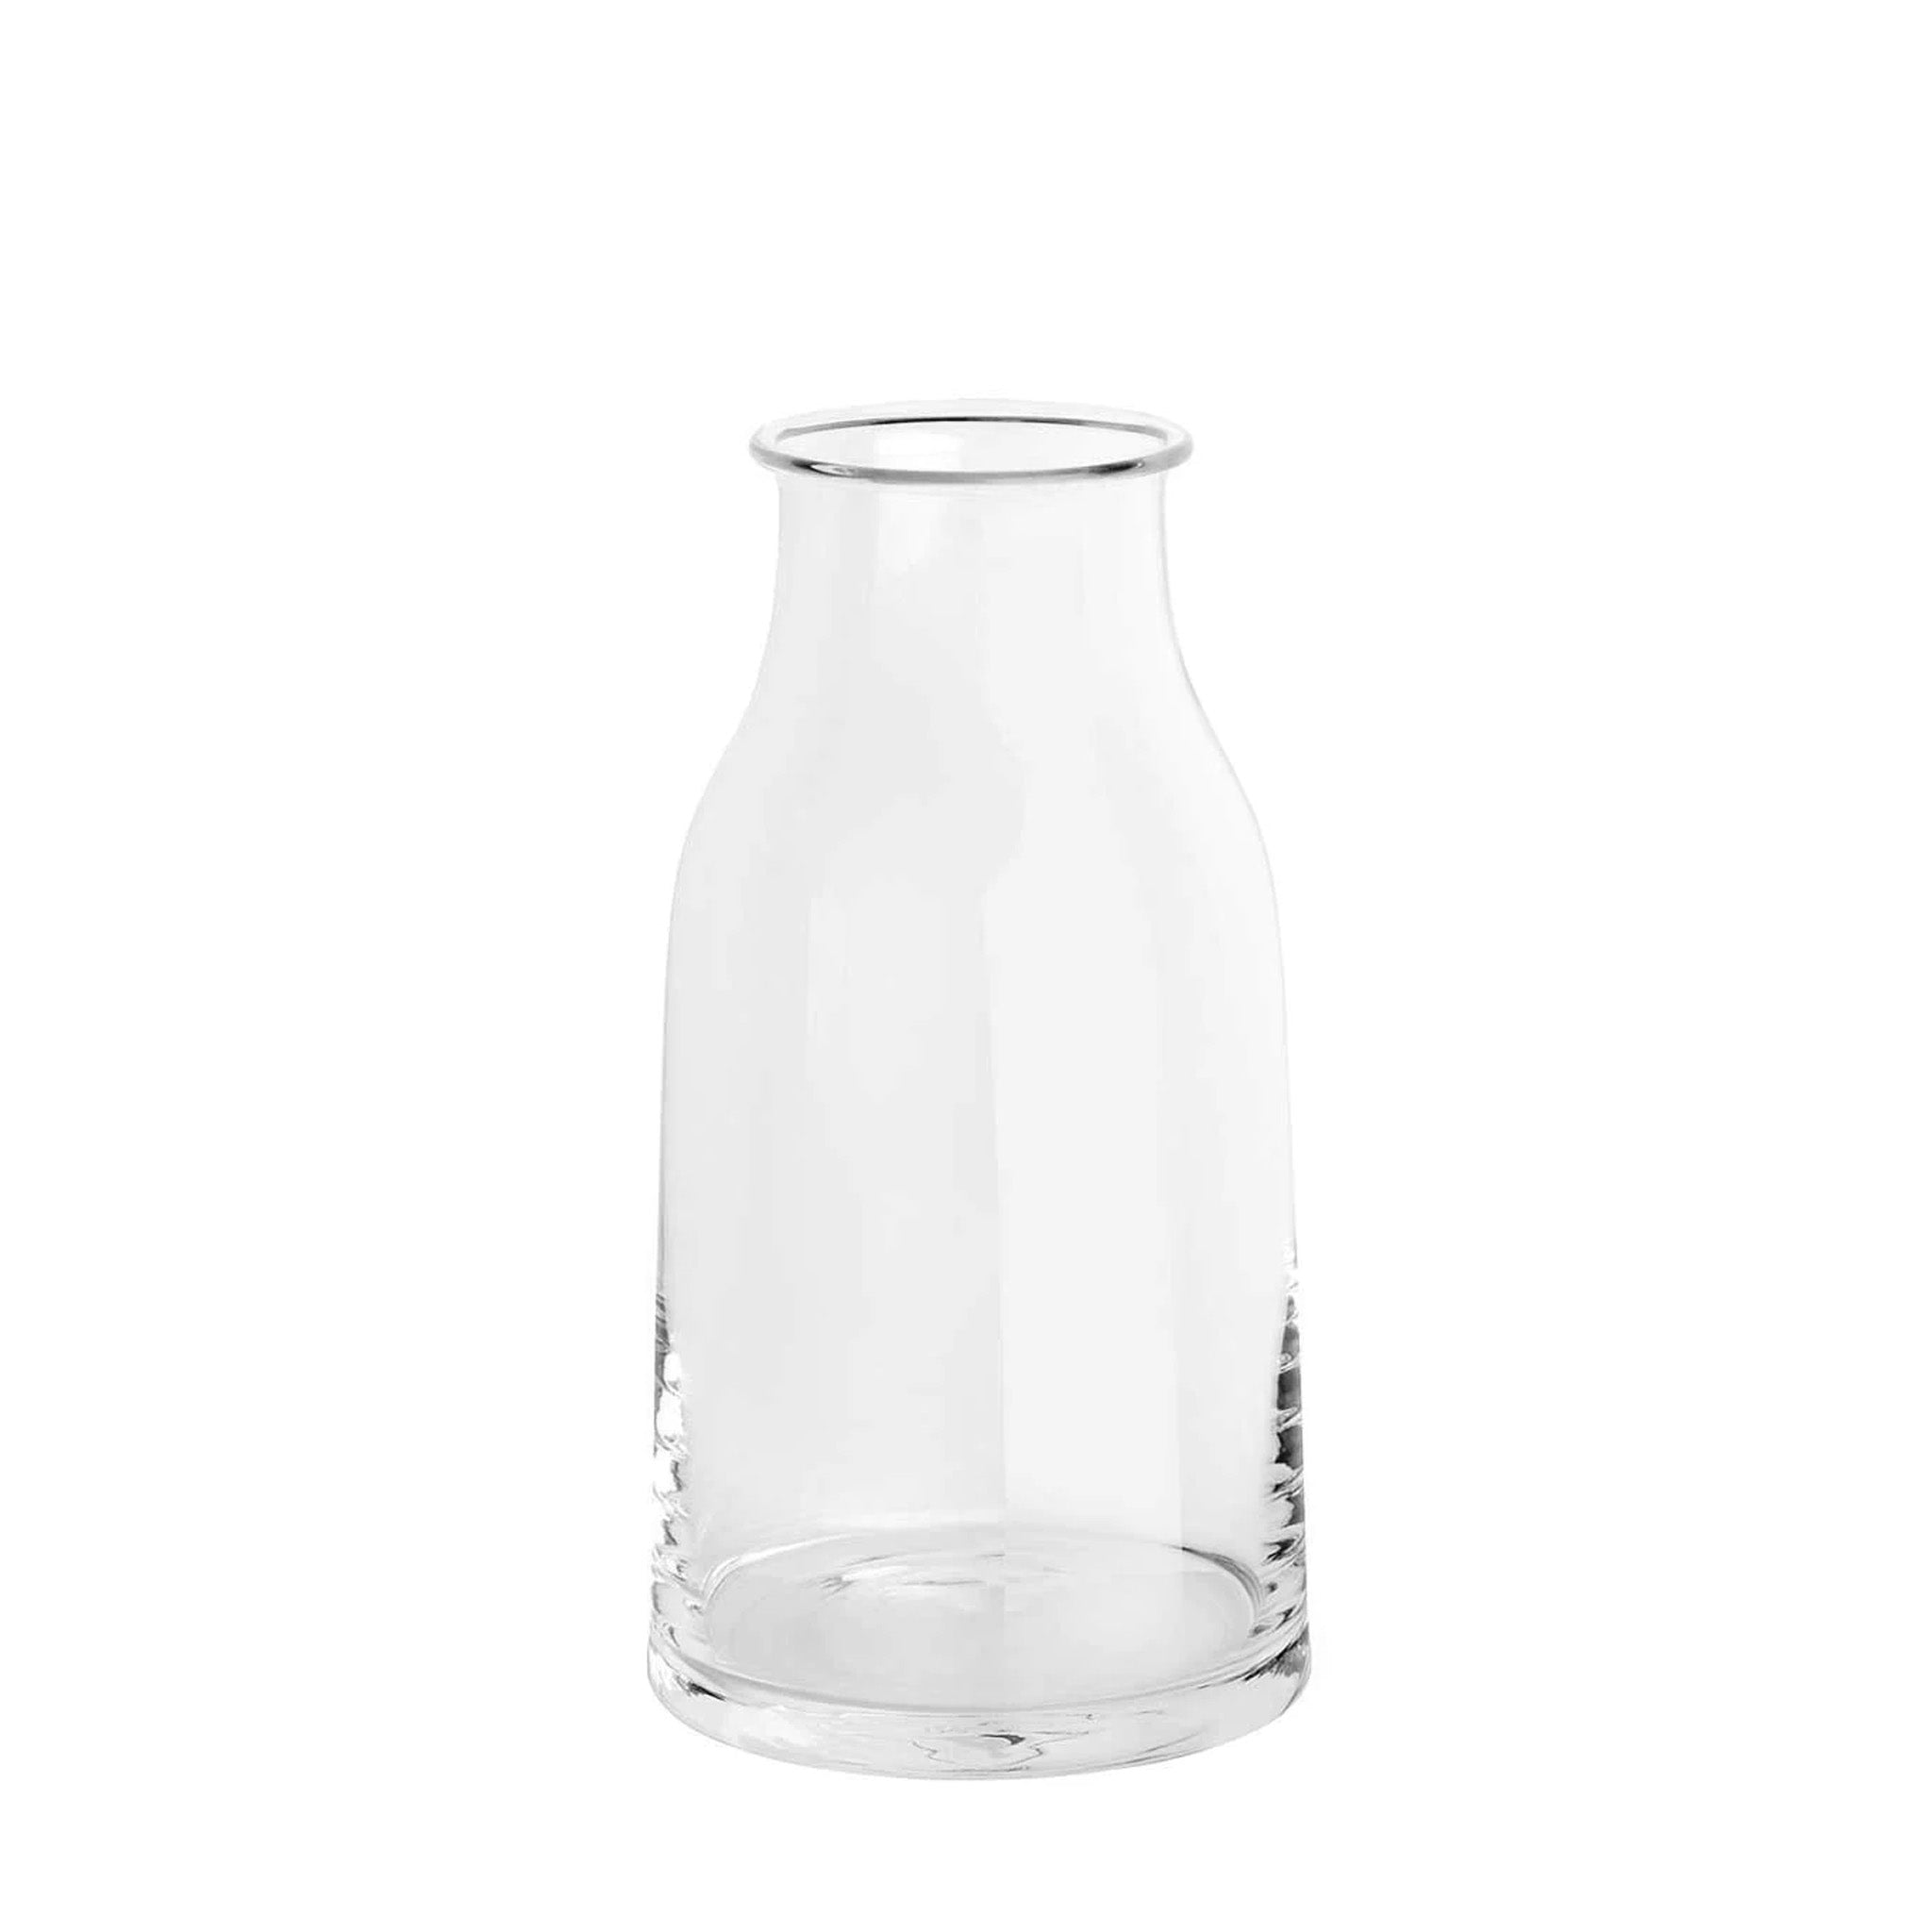 Tonale Carafe by David Chipperfield for Alessi